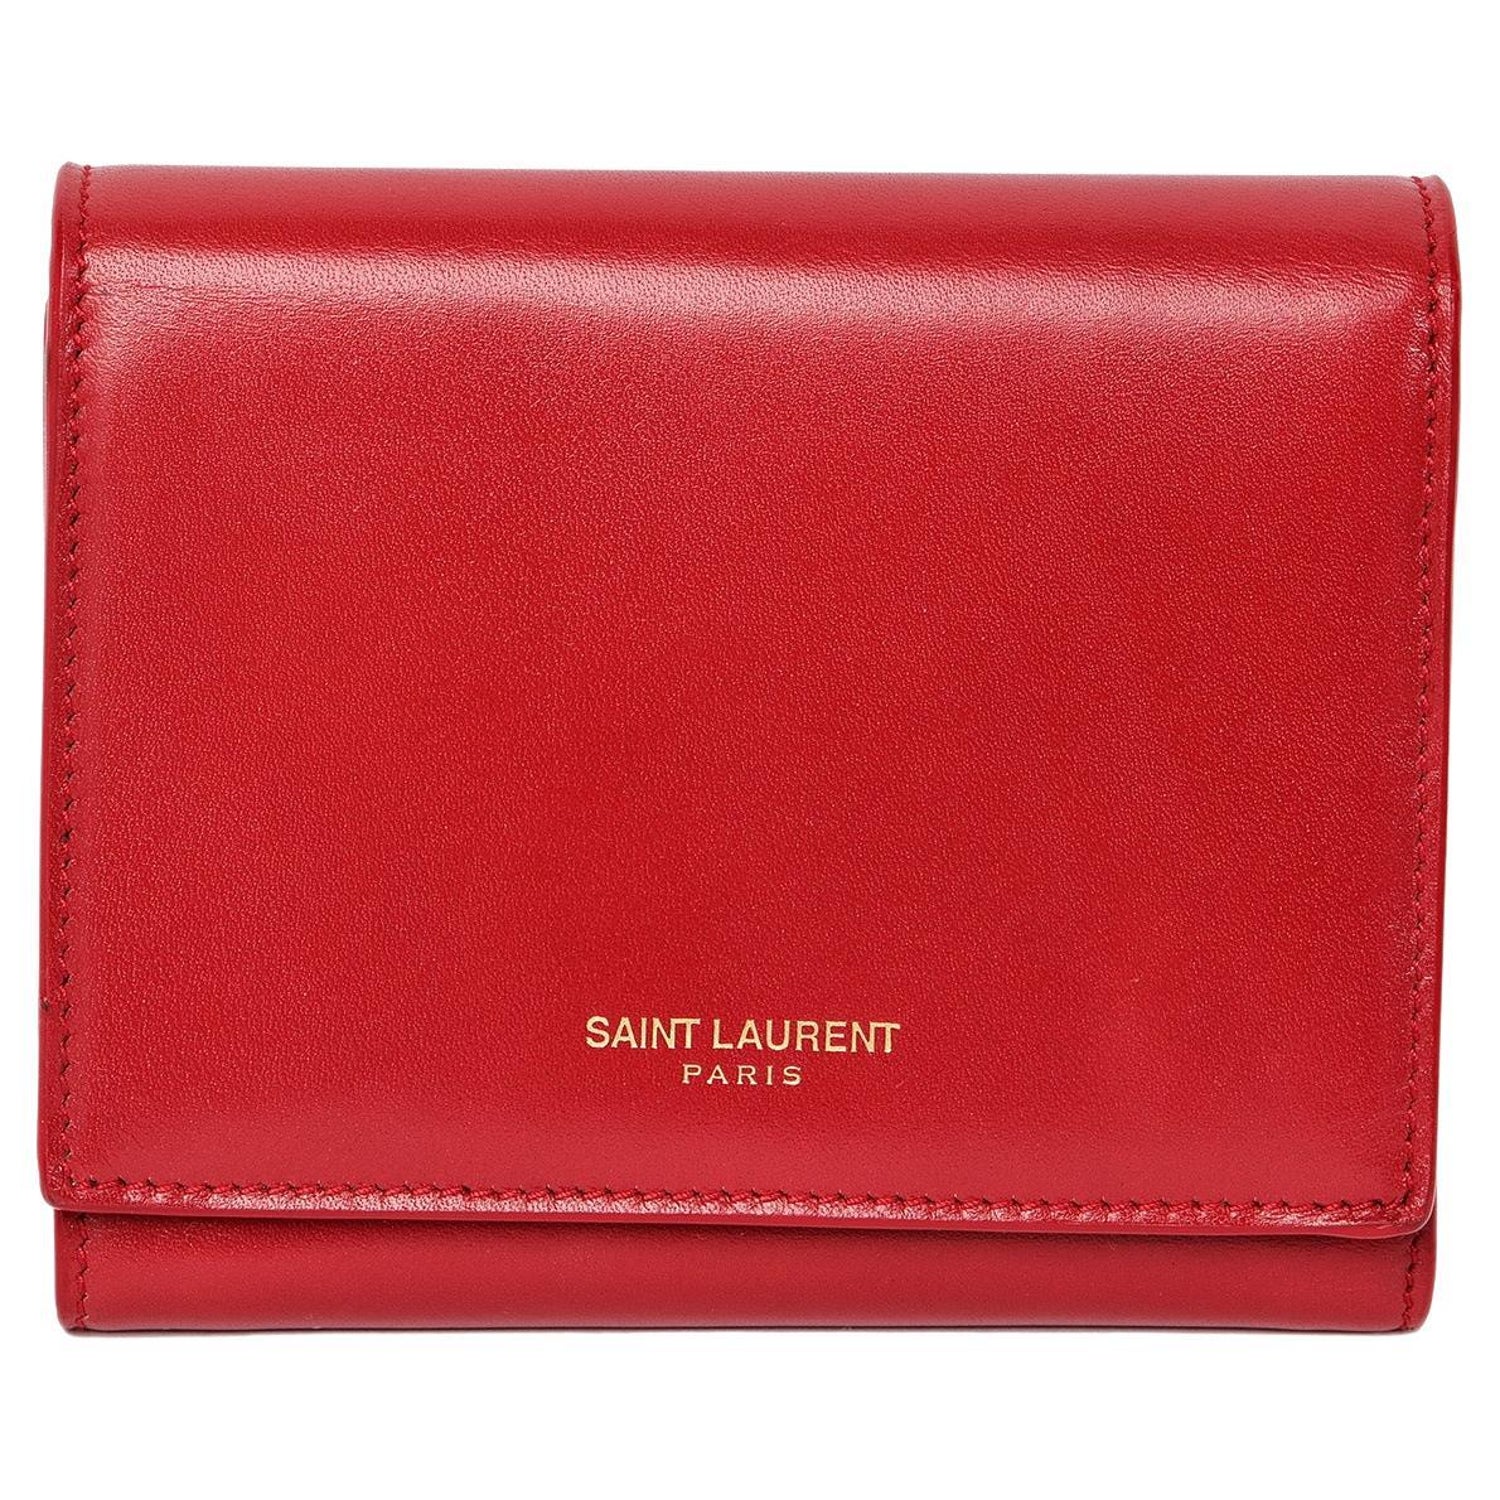 Twist Compact Wallet Epi Leather - Wallets and Small Leather Goods